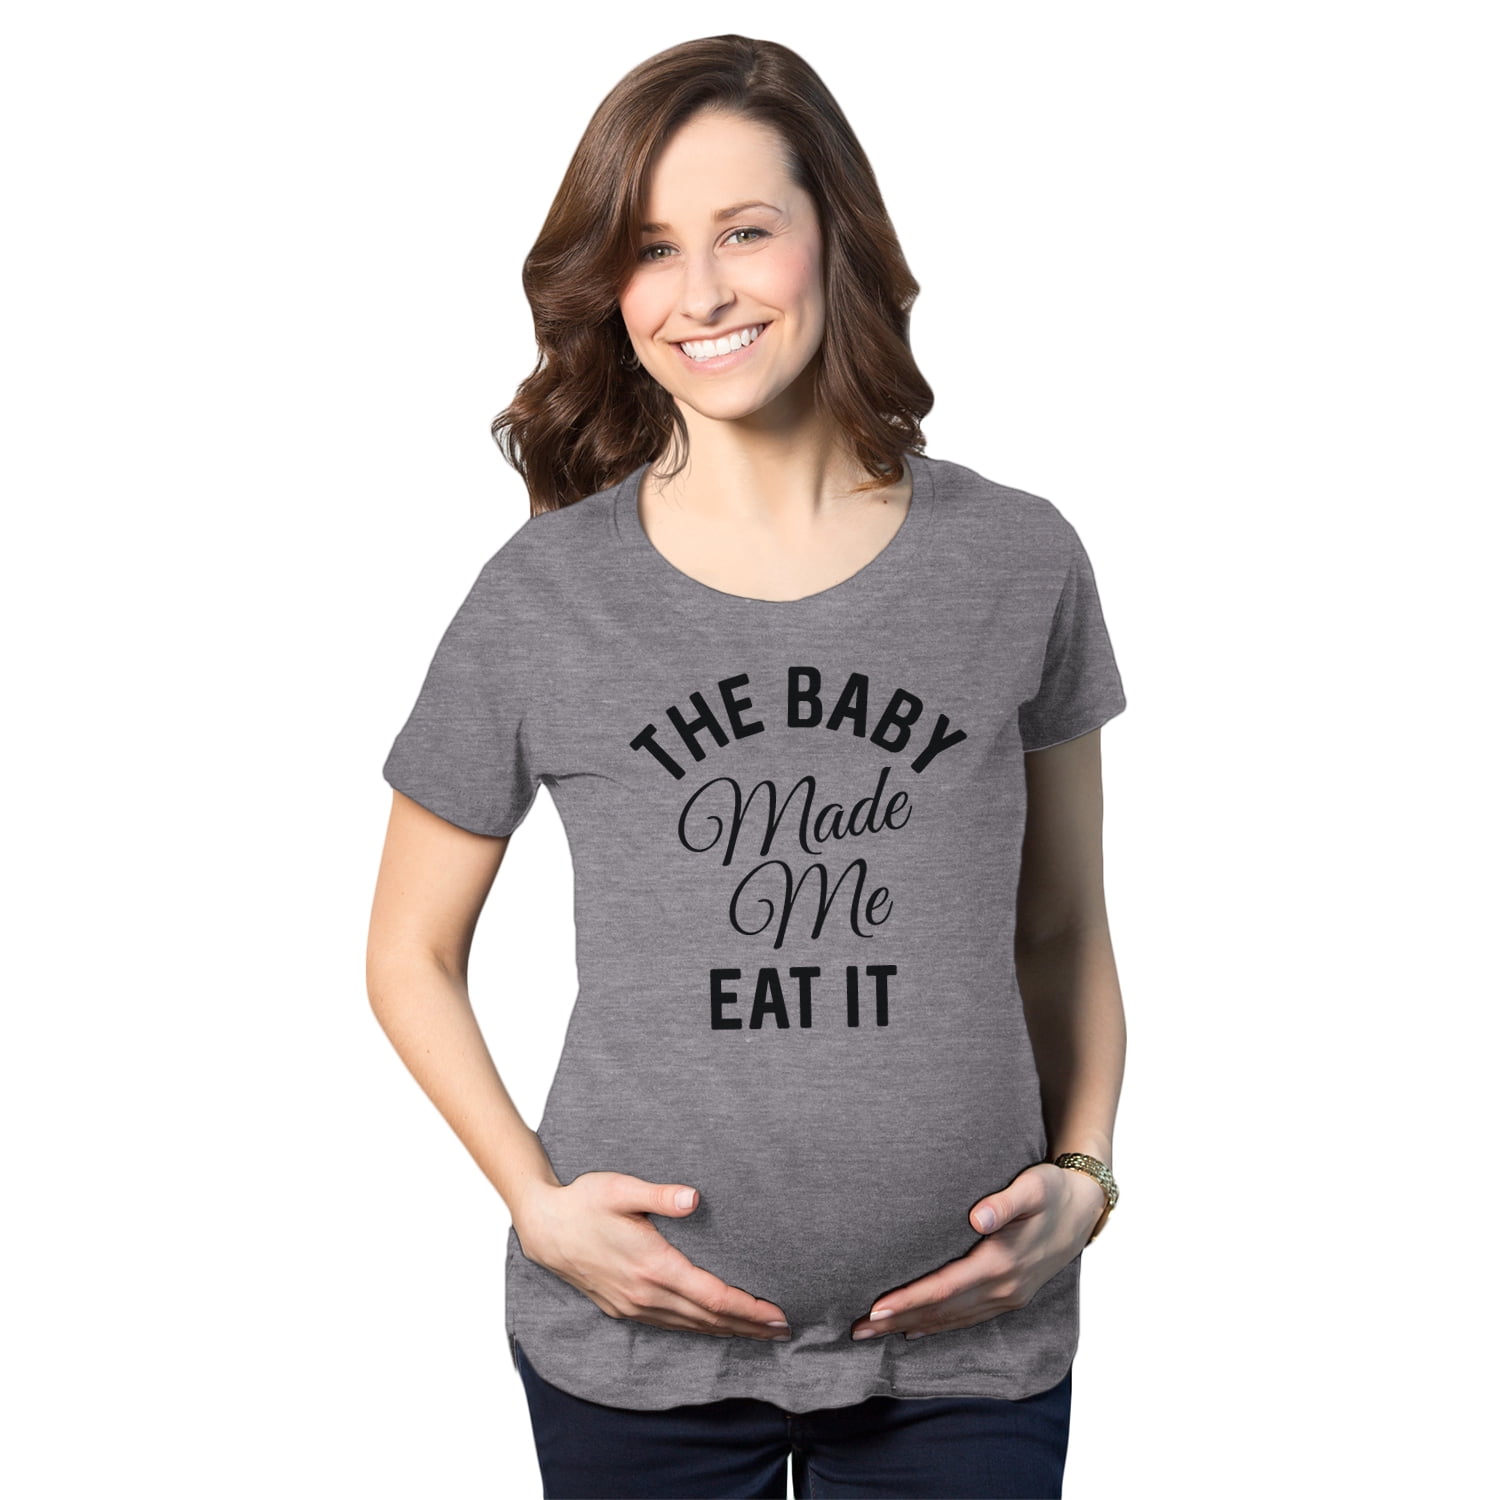 Gender Reveal Tees Baby Announcement T-Shirt Pregnancy Tshirt A Little Monkey Is Joining Our Circus 2021 Shirt New Baby Shirt